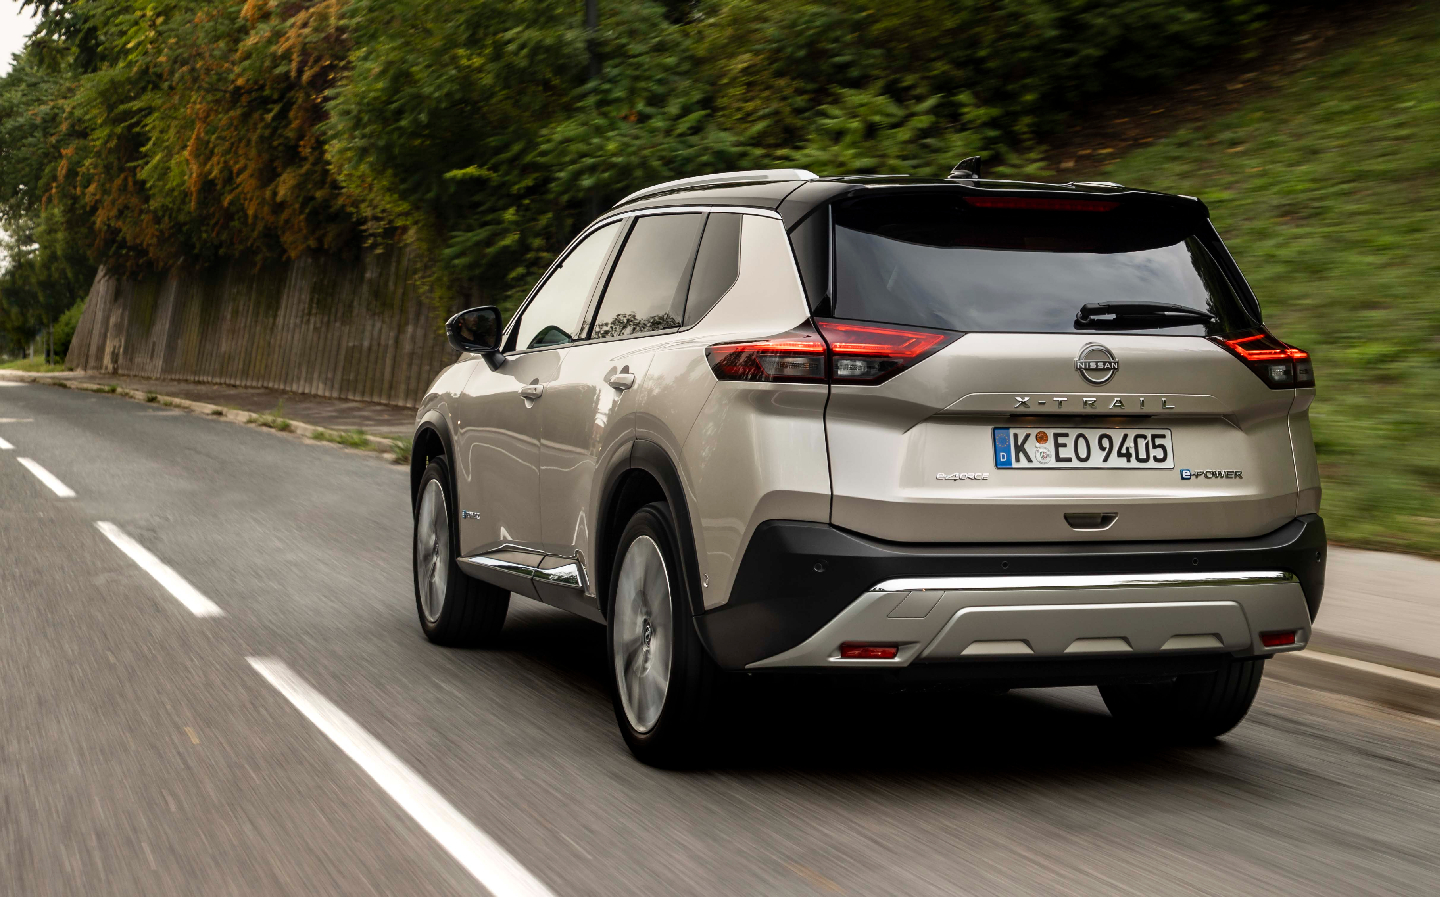 This is the new Nissan X-Trail